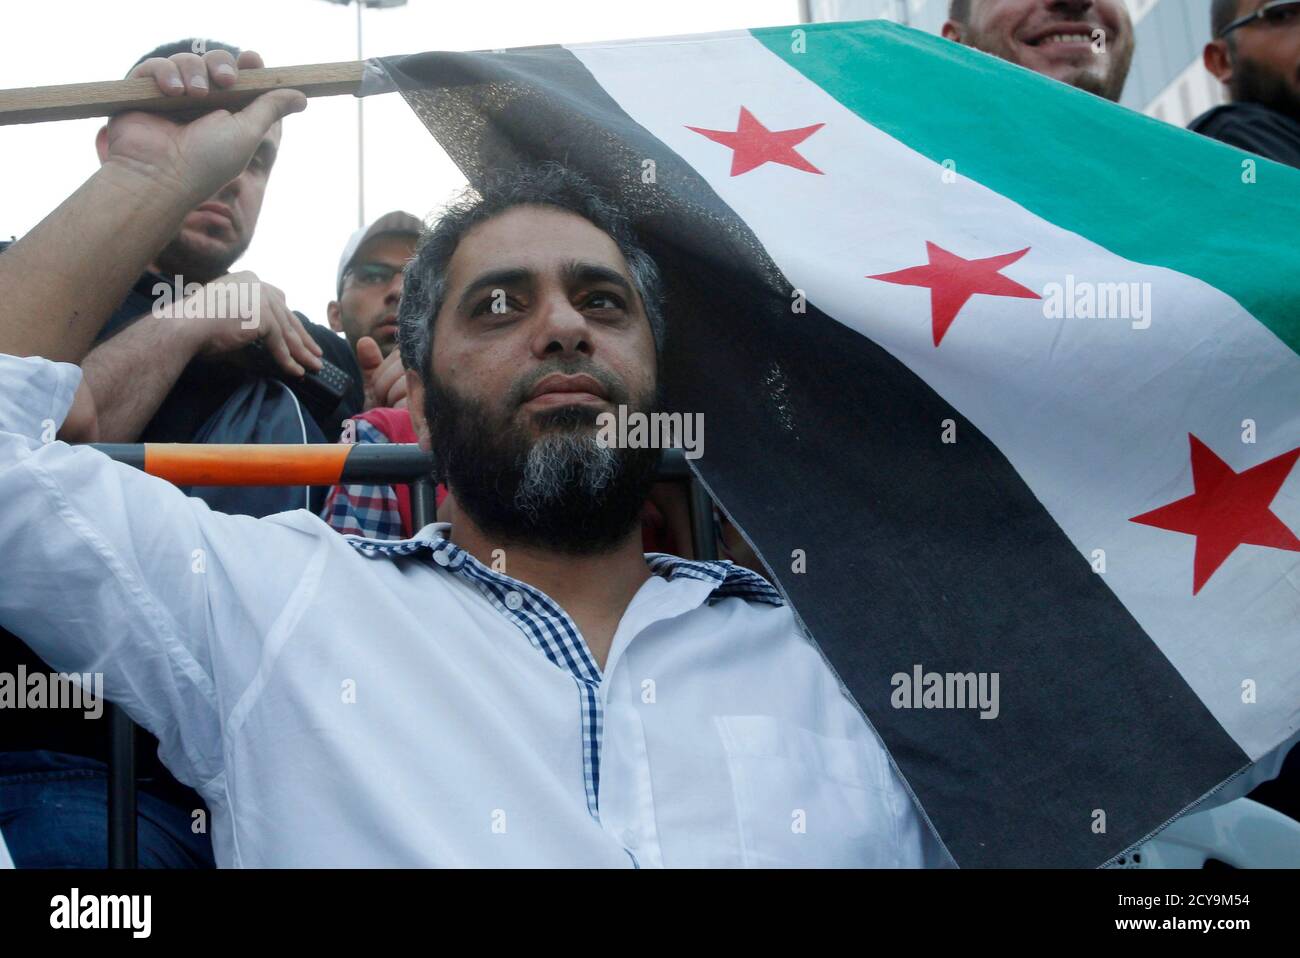 Lebanese singer Fadel Shaker waves a Syrian opposition flag as he takes  part in a protest organized by Sunni Muslim Salafist leader Ahmad al-Assir,  against the Syrian regime in Sidon, southern Lebanon